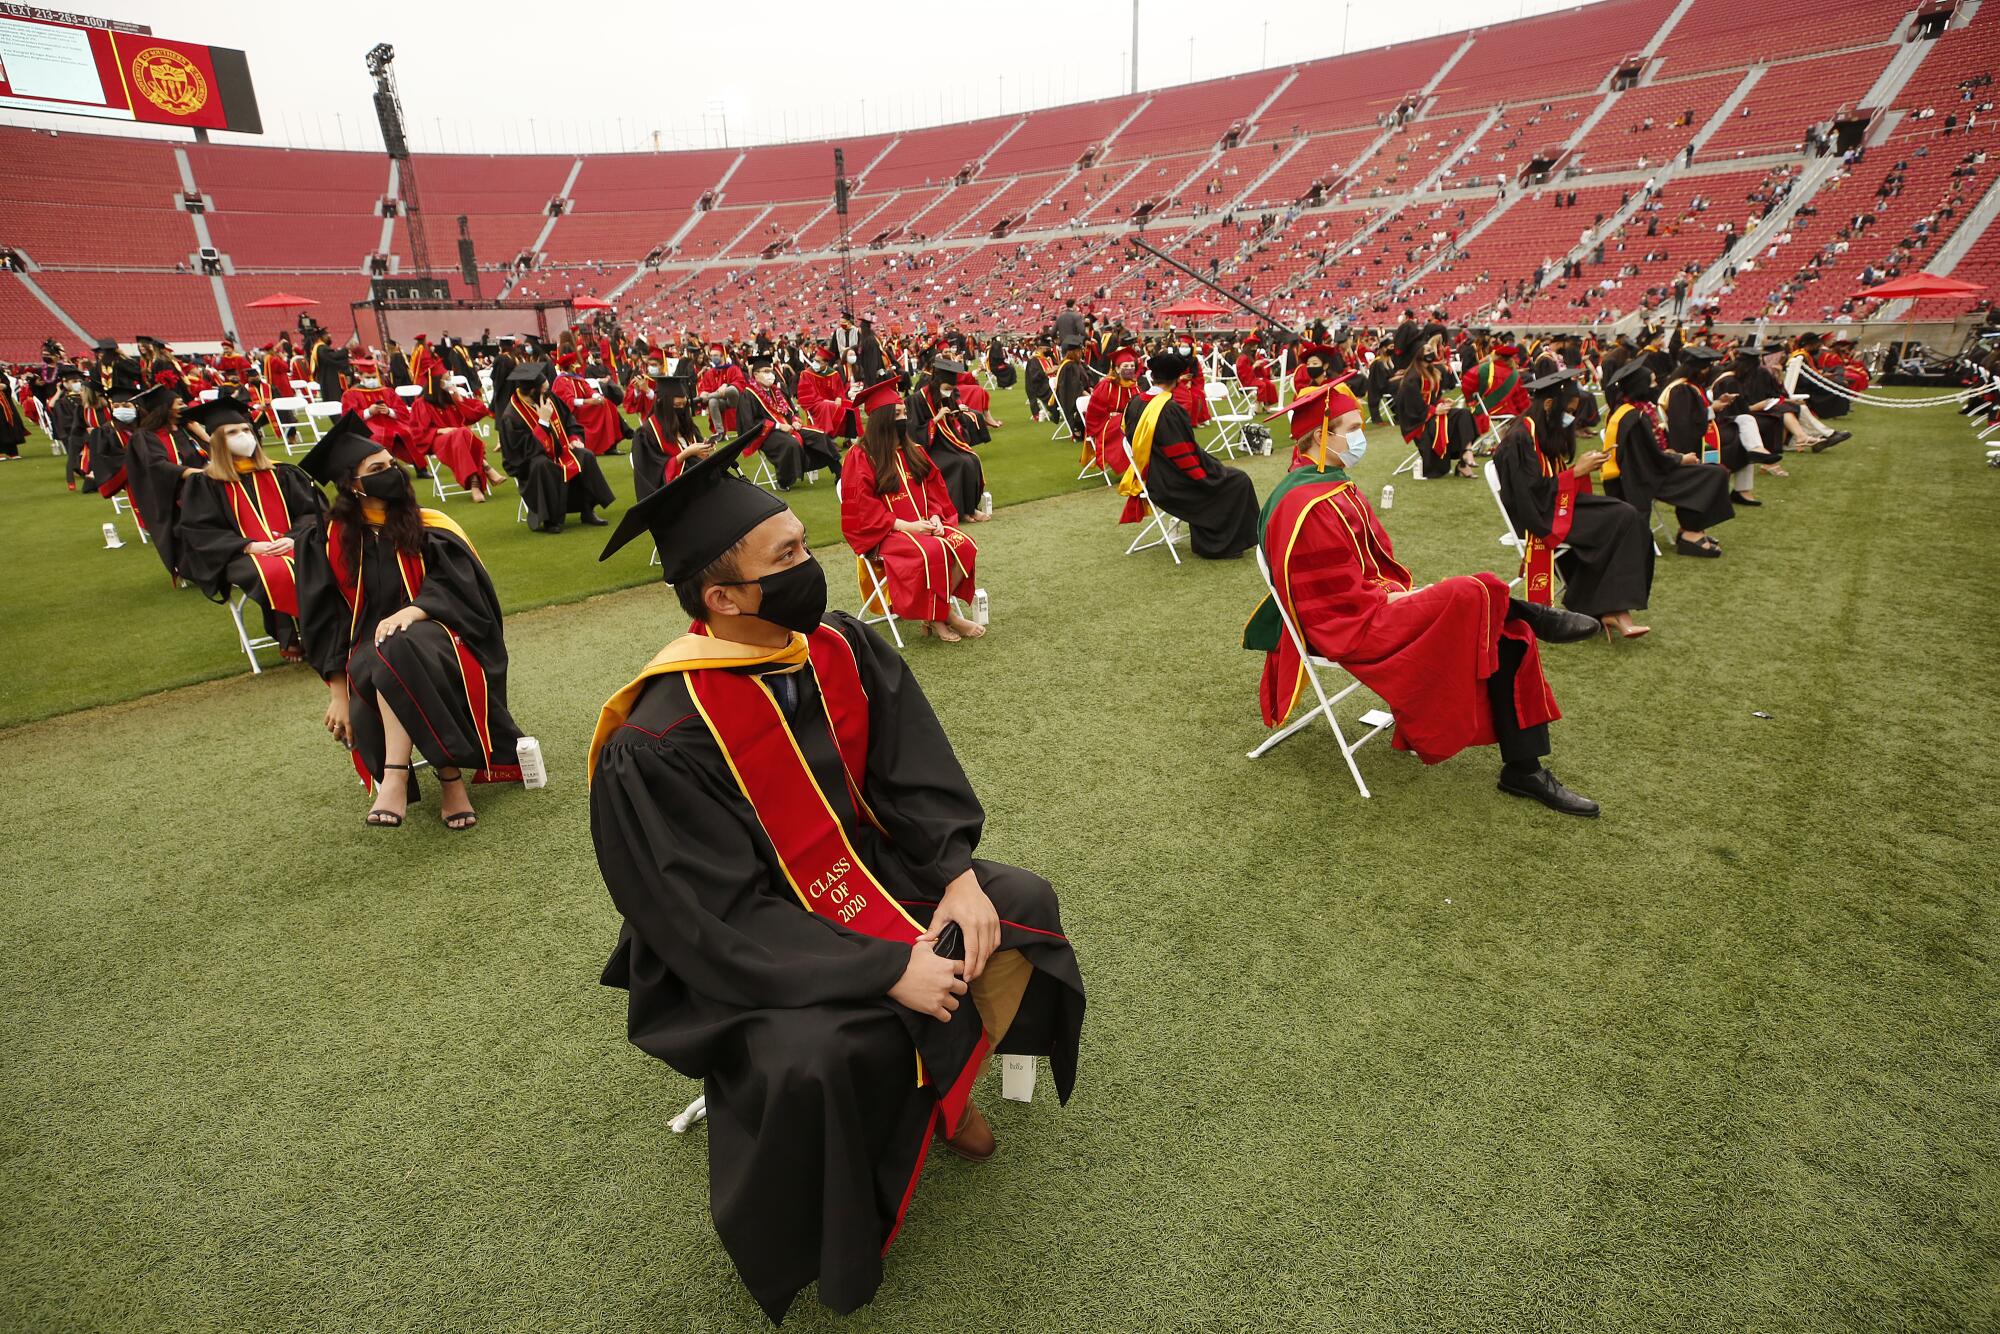 Students in red or black gowns sit on folding chairs spaced out on the USC football field